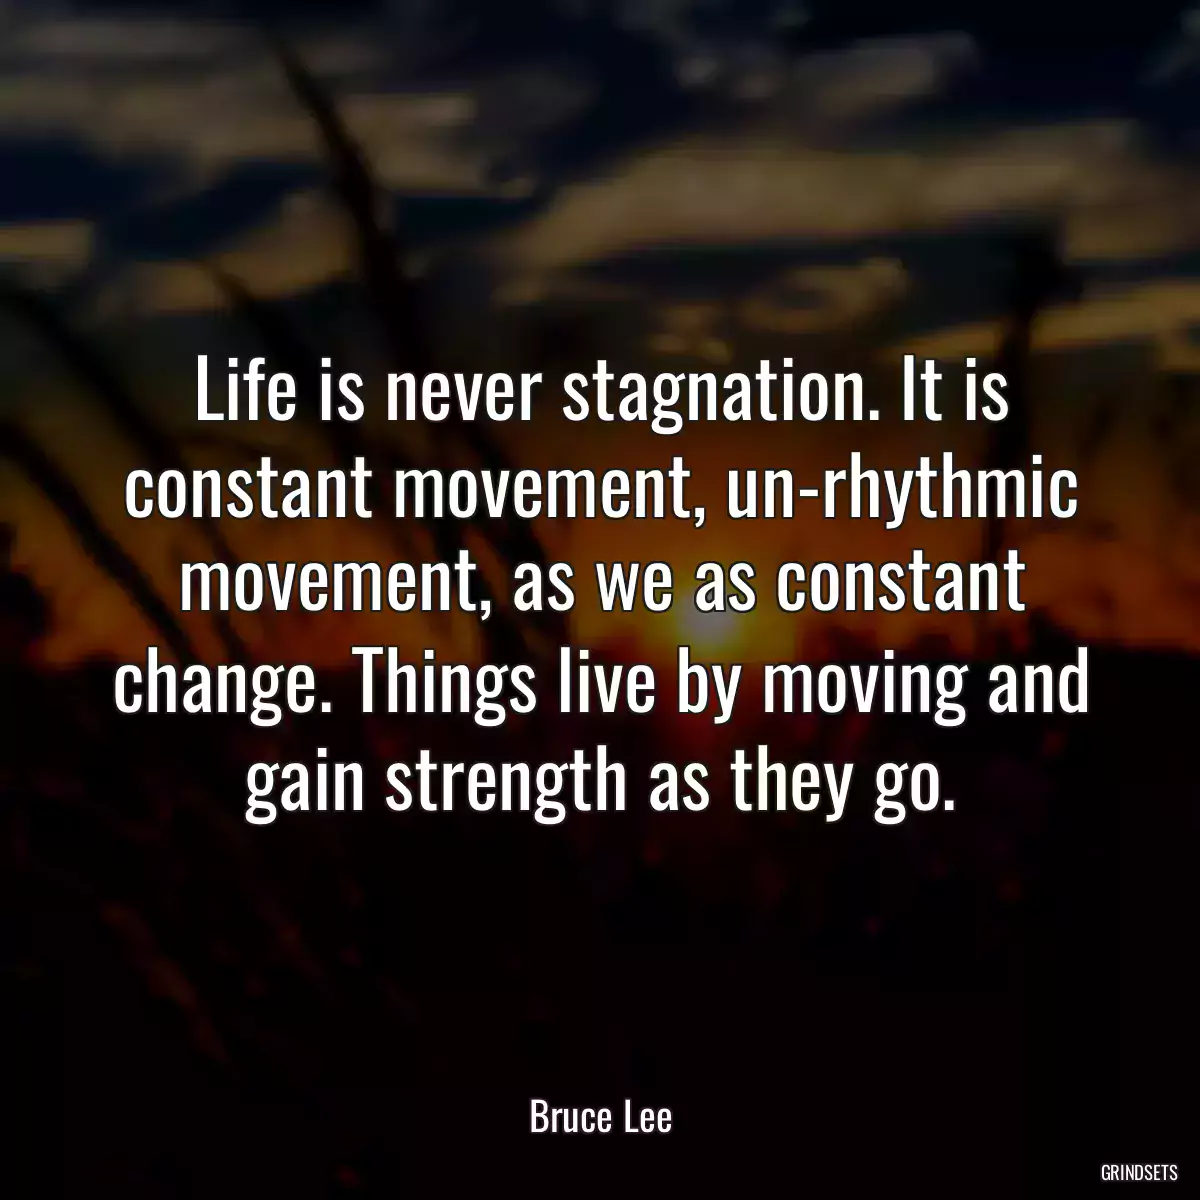 Life is never stagnation. It is constant movement, un-rhythmic movement, as we as constant change. Things live by moving and gain strength as they go.